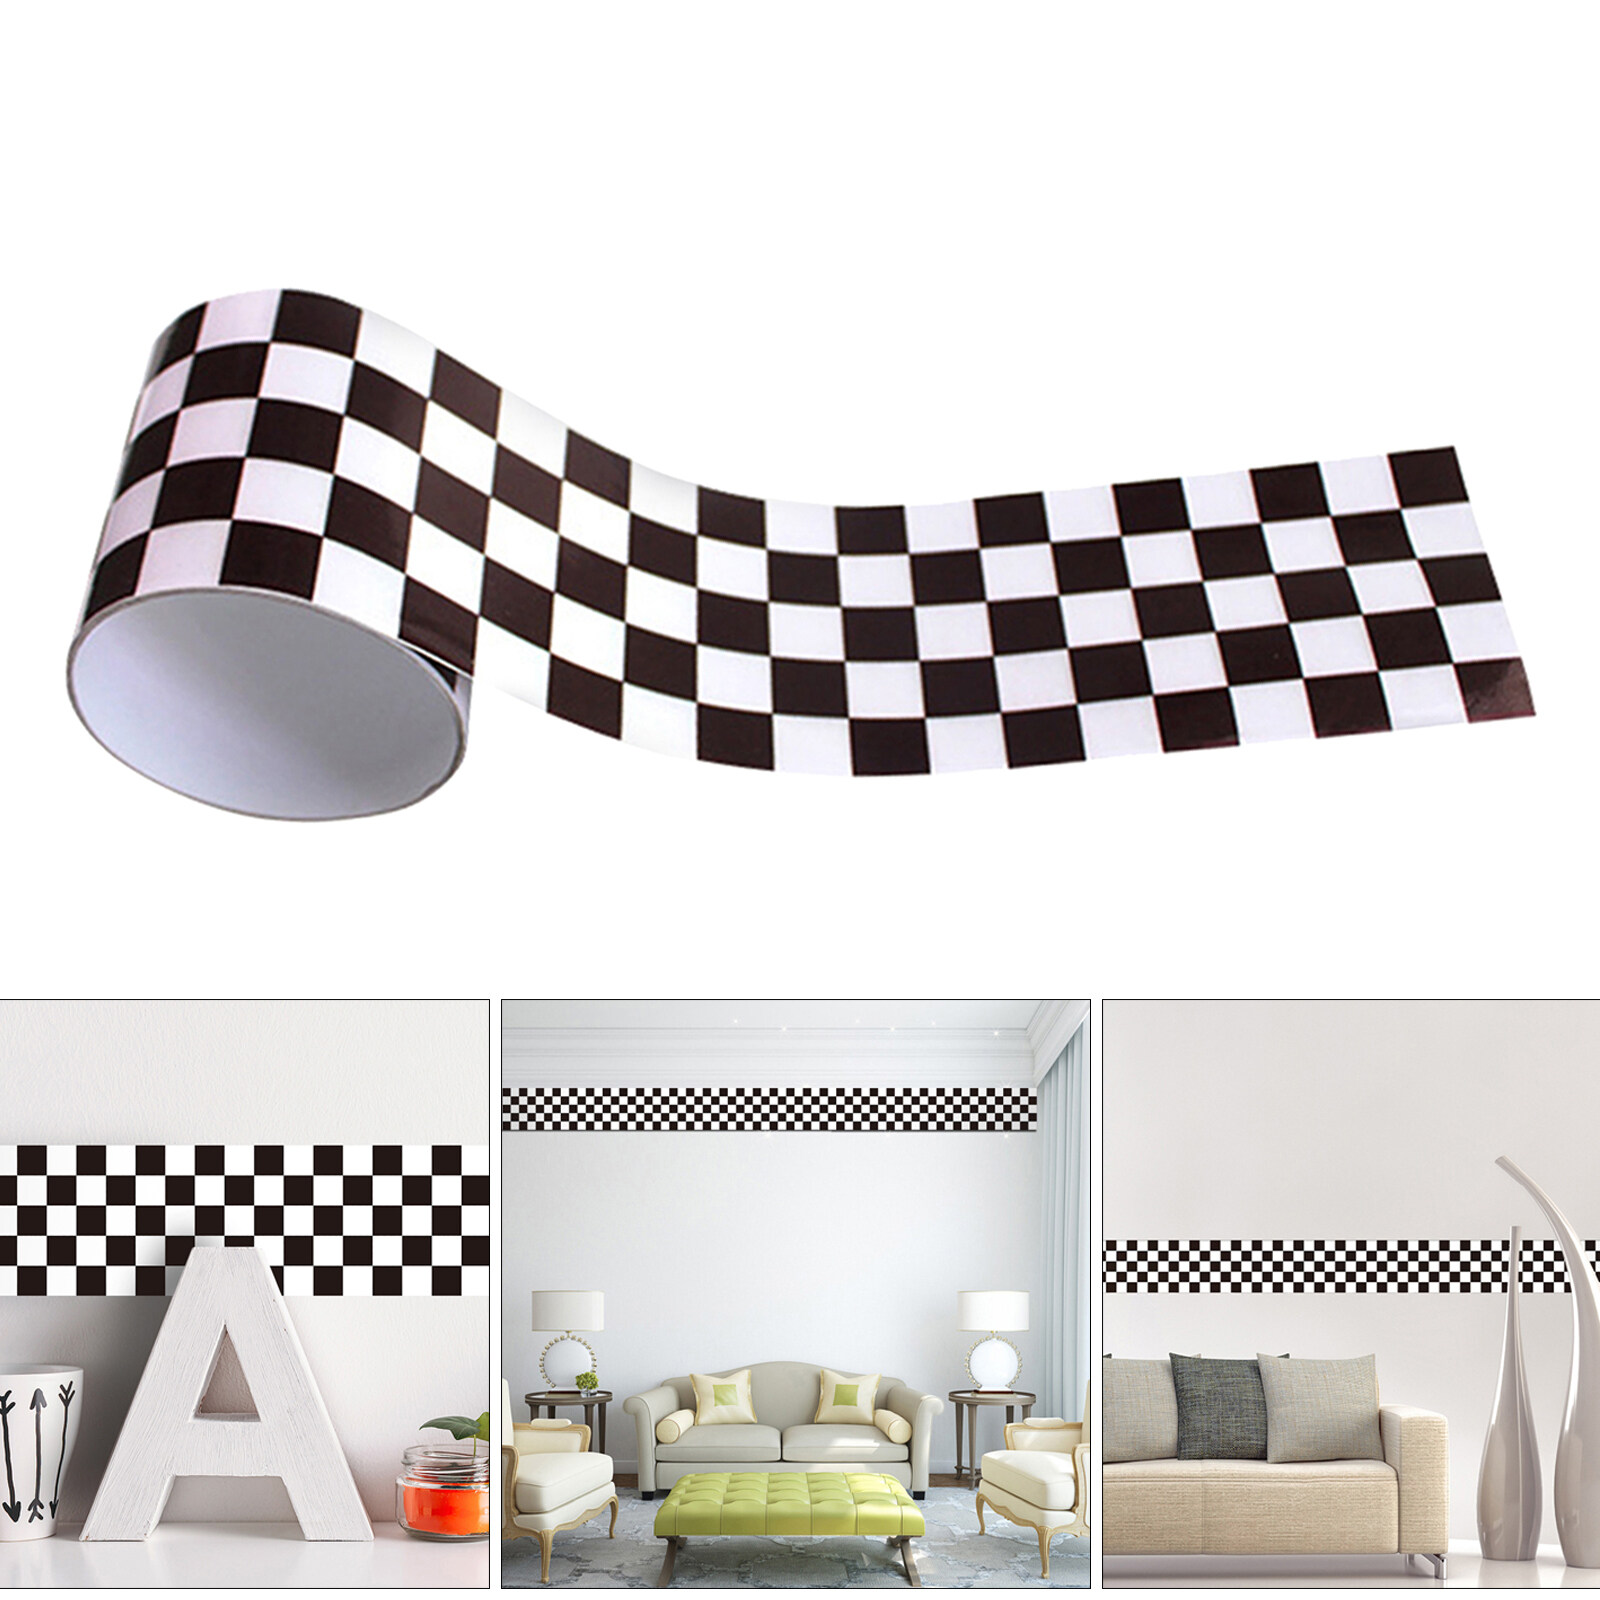 Dolity Black White Grid Mosaic Wall Decal Wall Sticker Living Room